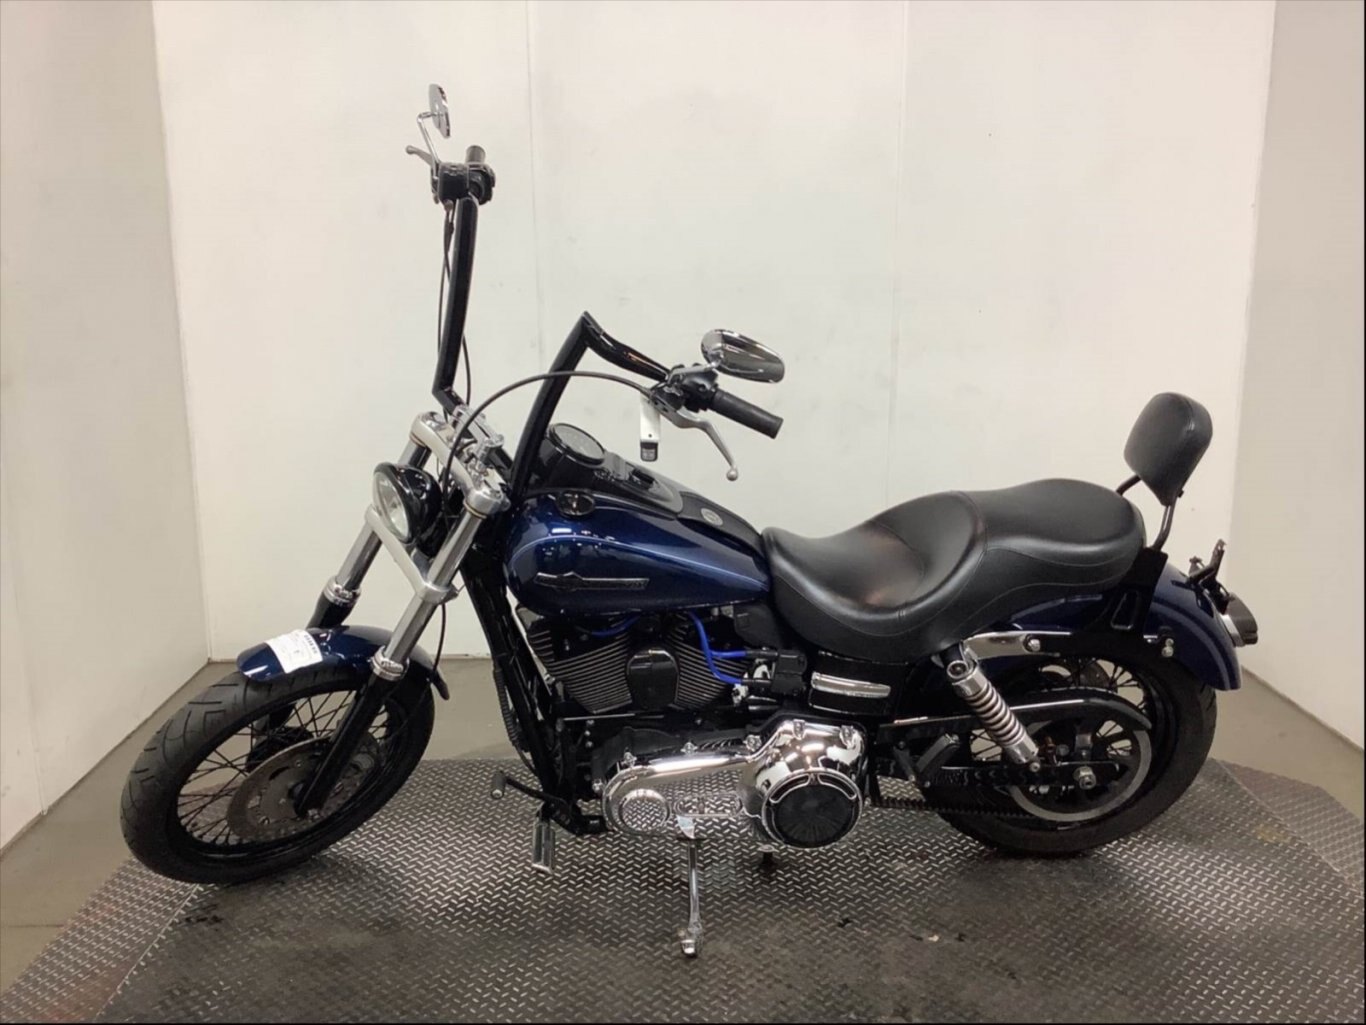 2012 Harley Davidson FXDC Super Glide Custom SOLD CONGRATULATIONS BENJAMIN, WELCOME TO THE WORLD OF TWO WHEELED EXCITEMENT!!